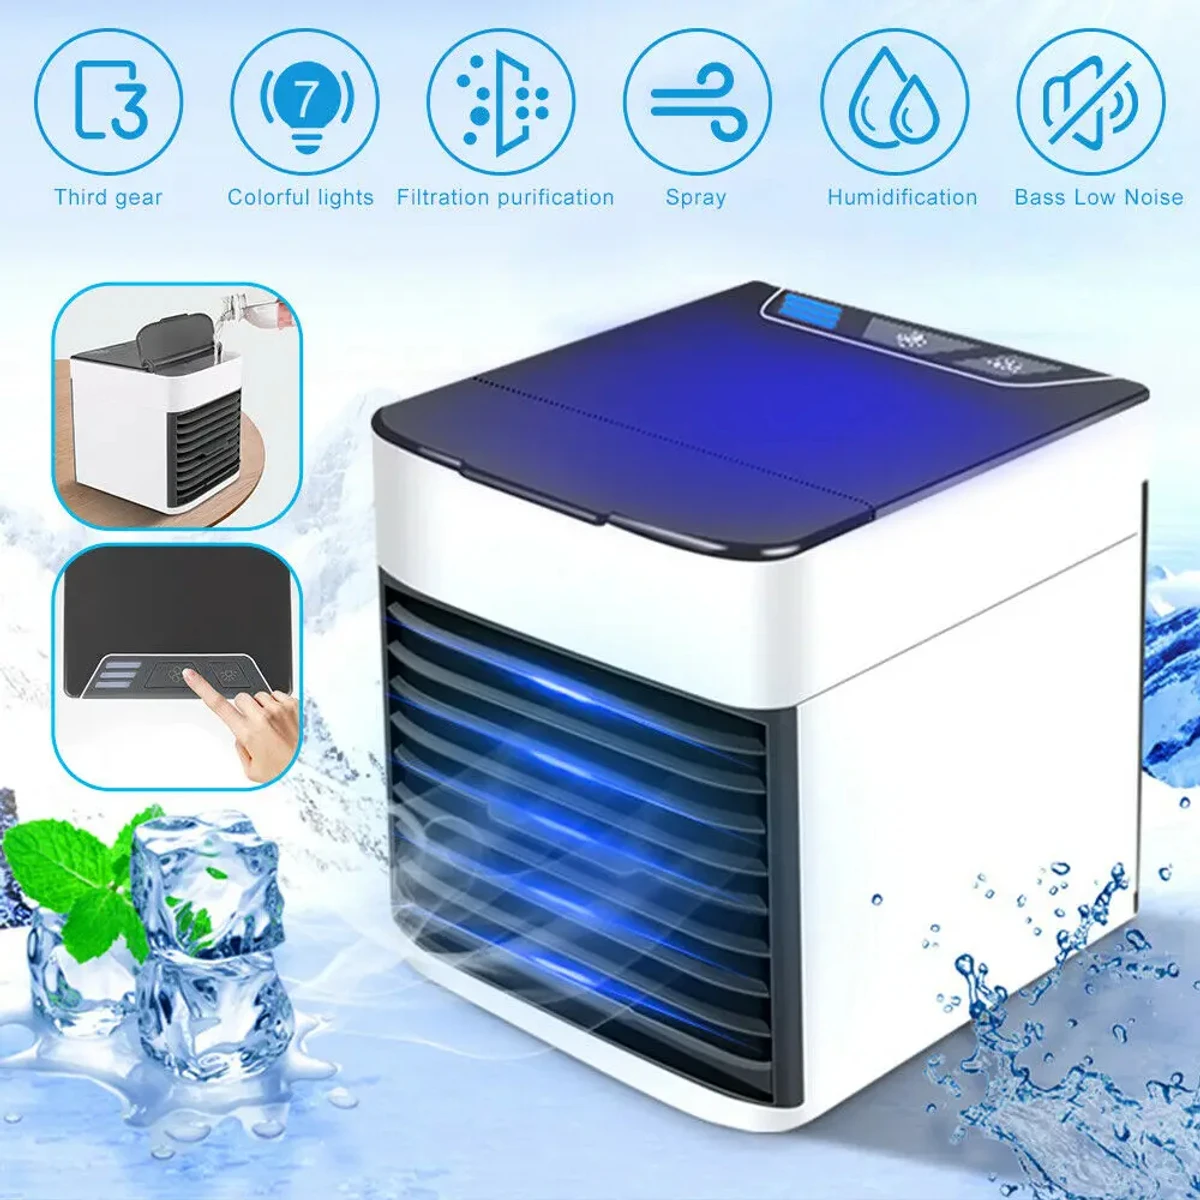 Portable USB Mini Air Cooler Fan Evaporative Cooler 3-Speed with LED Light